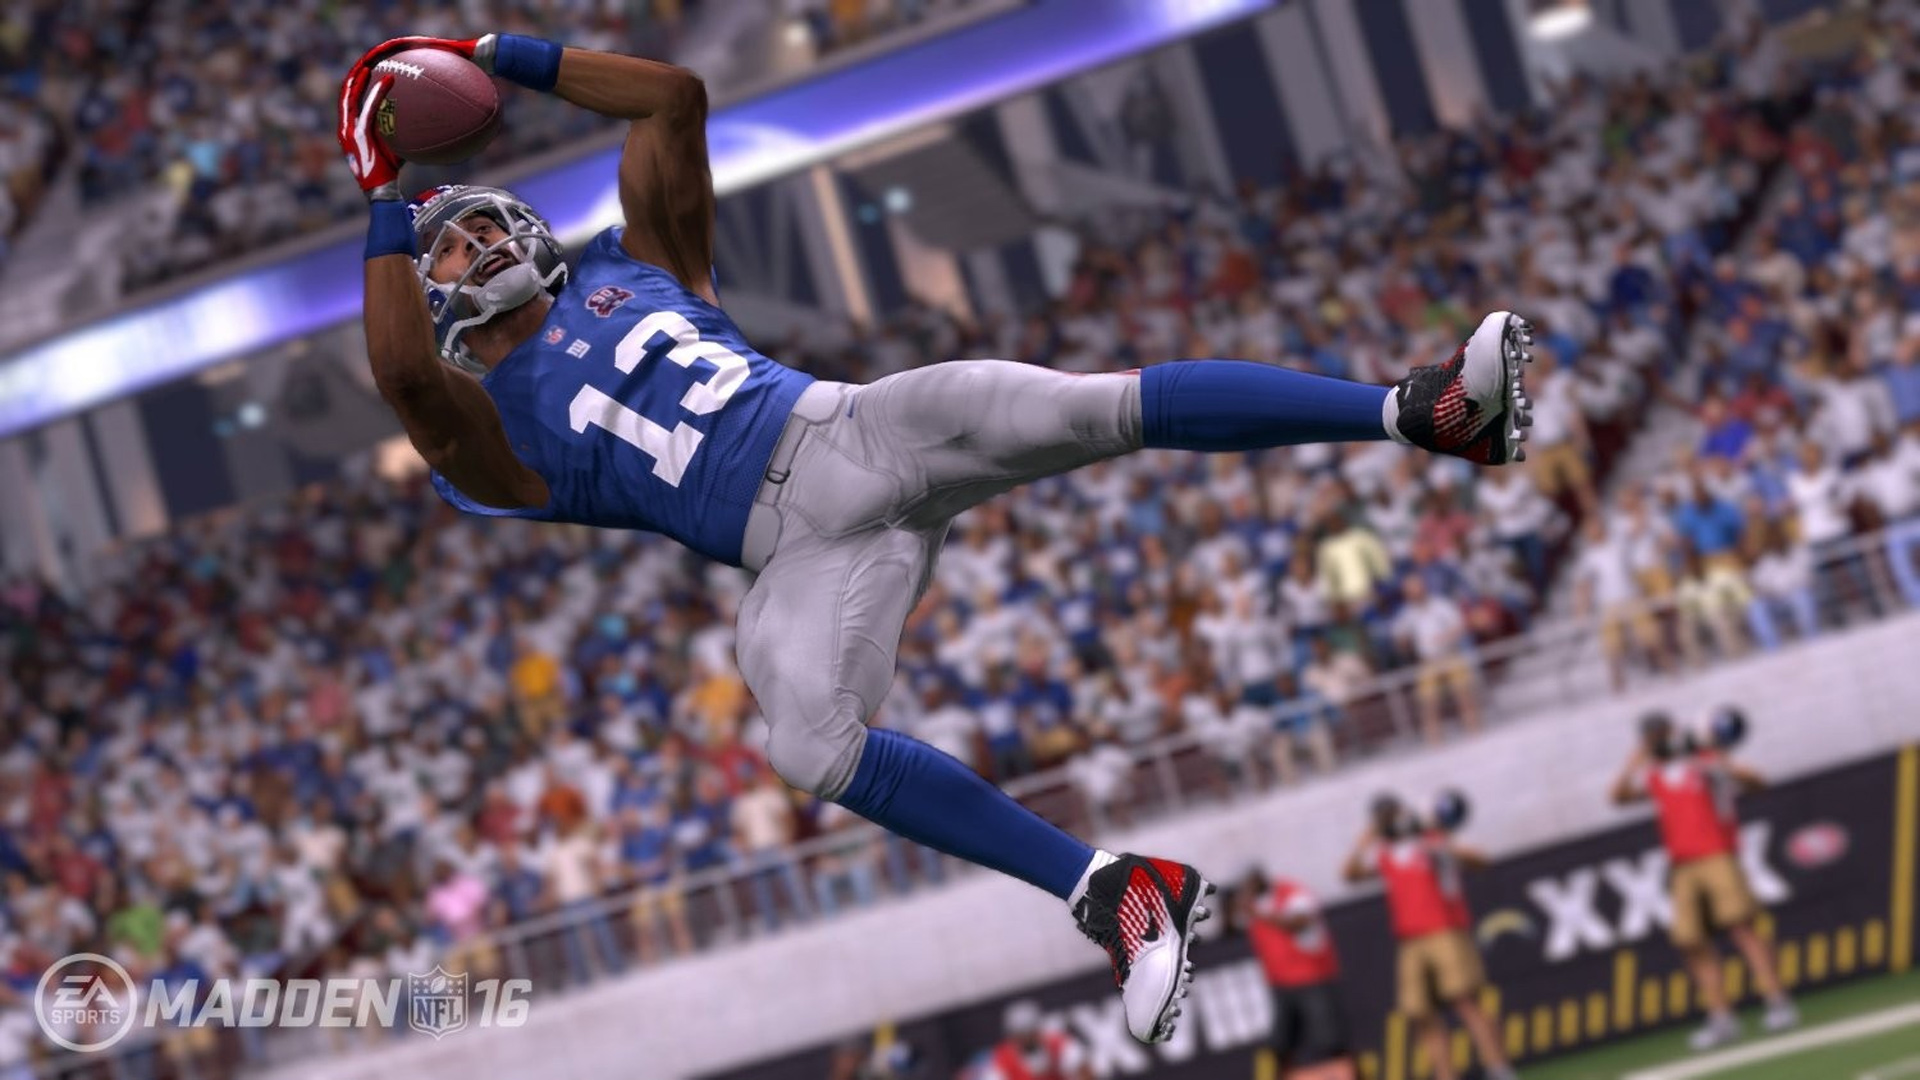 Madden 16 now on EA Access Trial